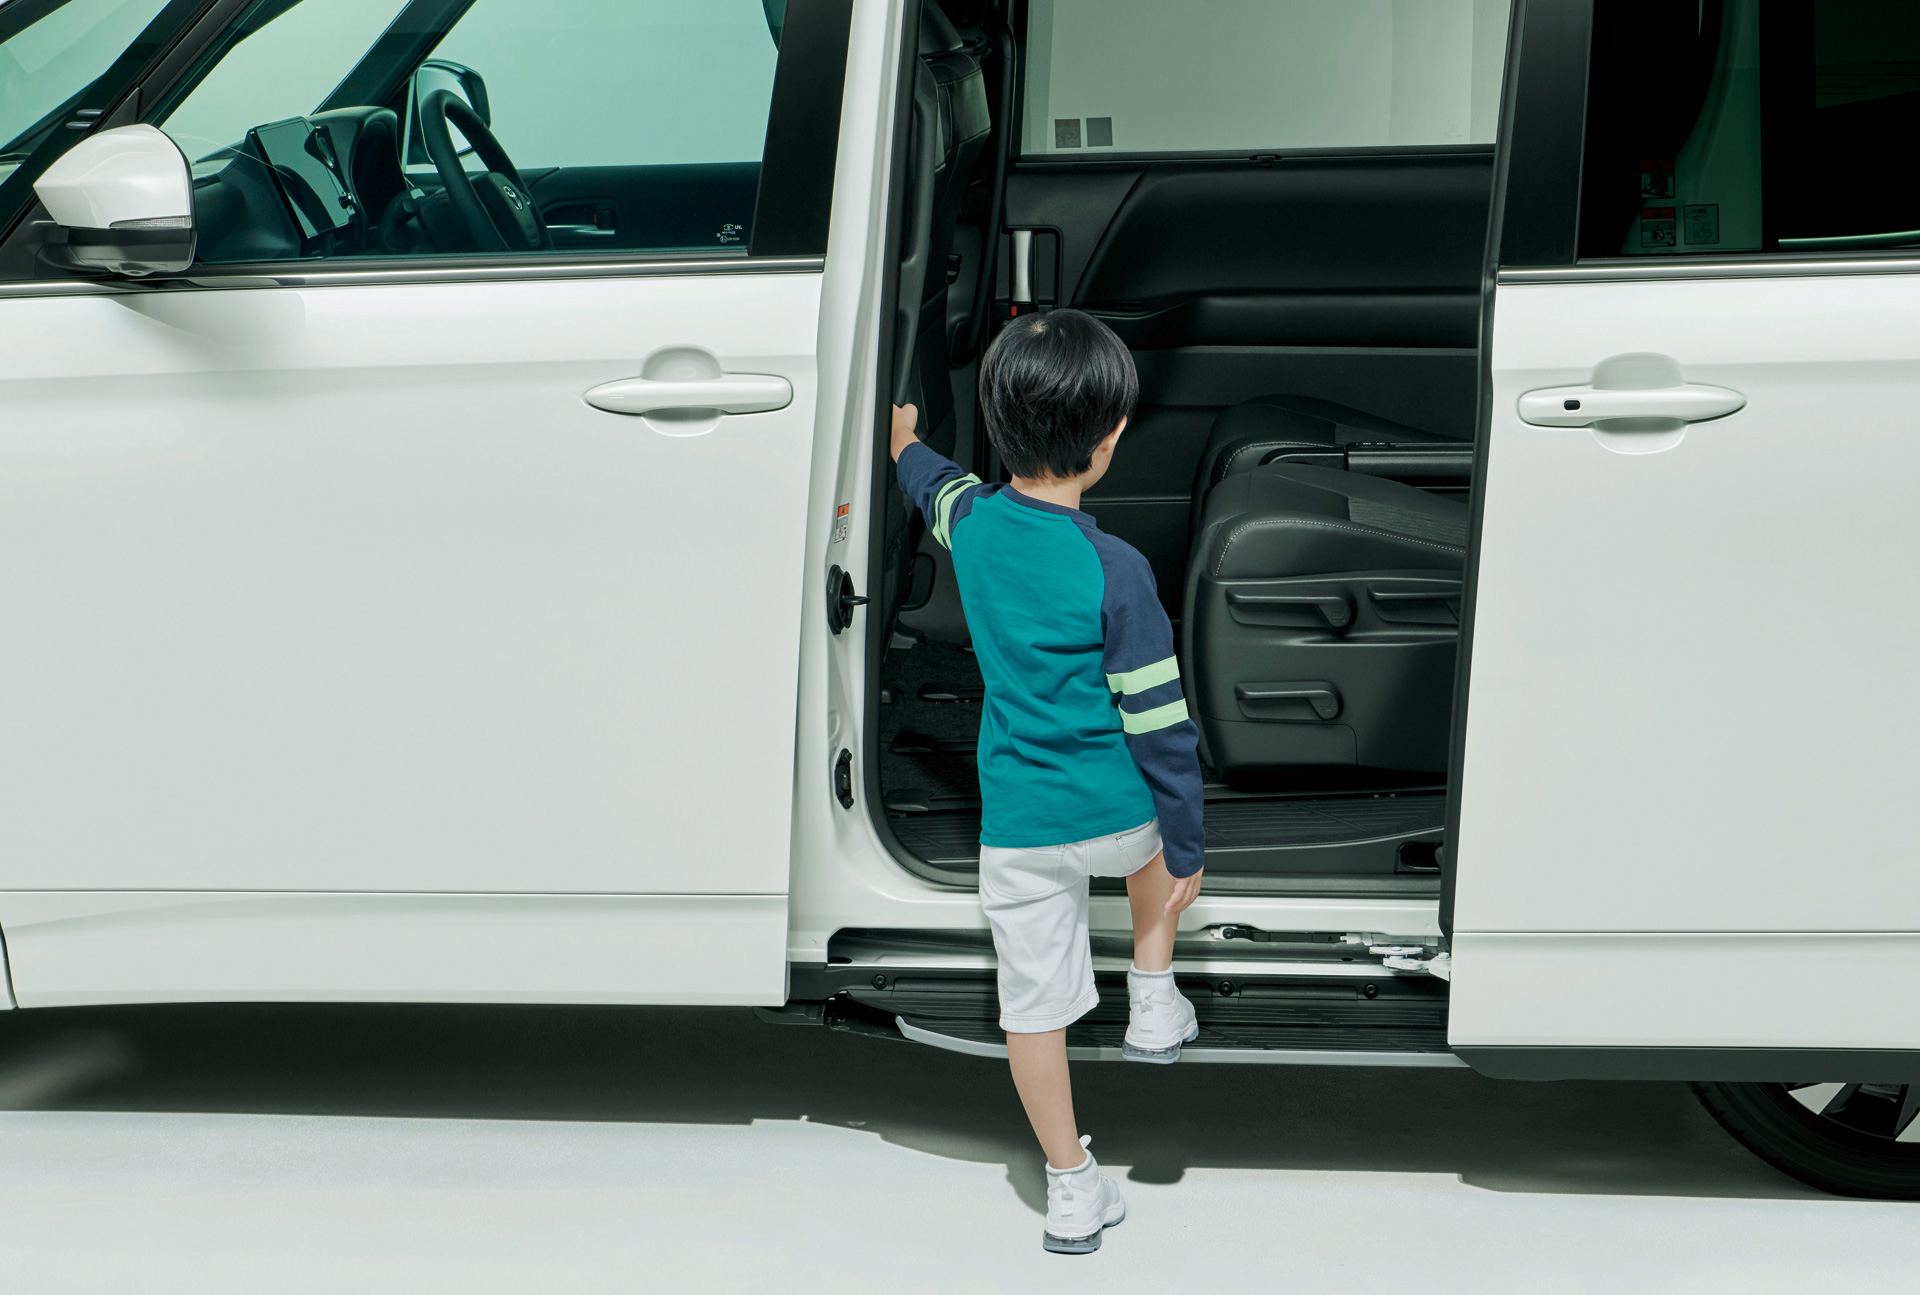 Toyota Launches New Noah and Voxy Minivans in JapanMinivans with more comfort, convenience, and peace of mind to bring joy to all - Image 1